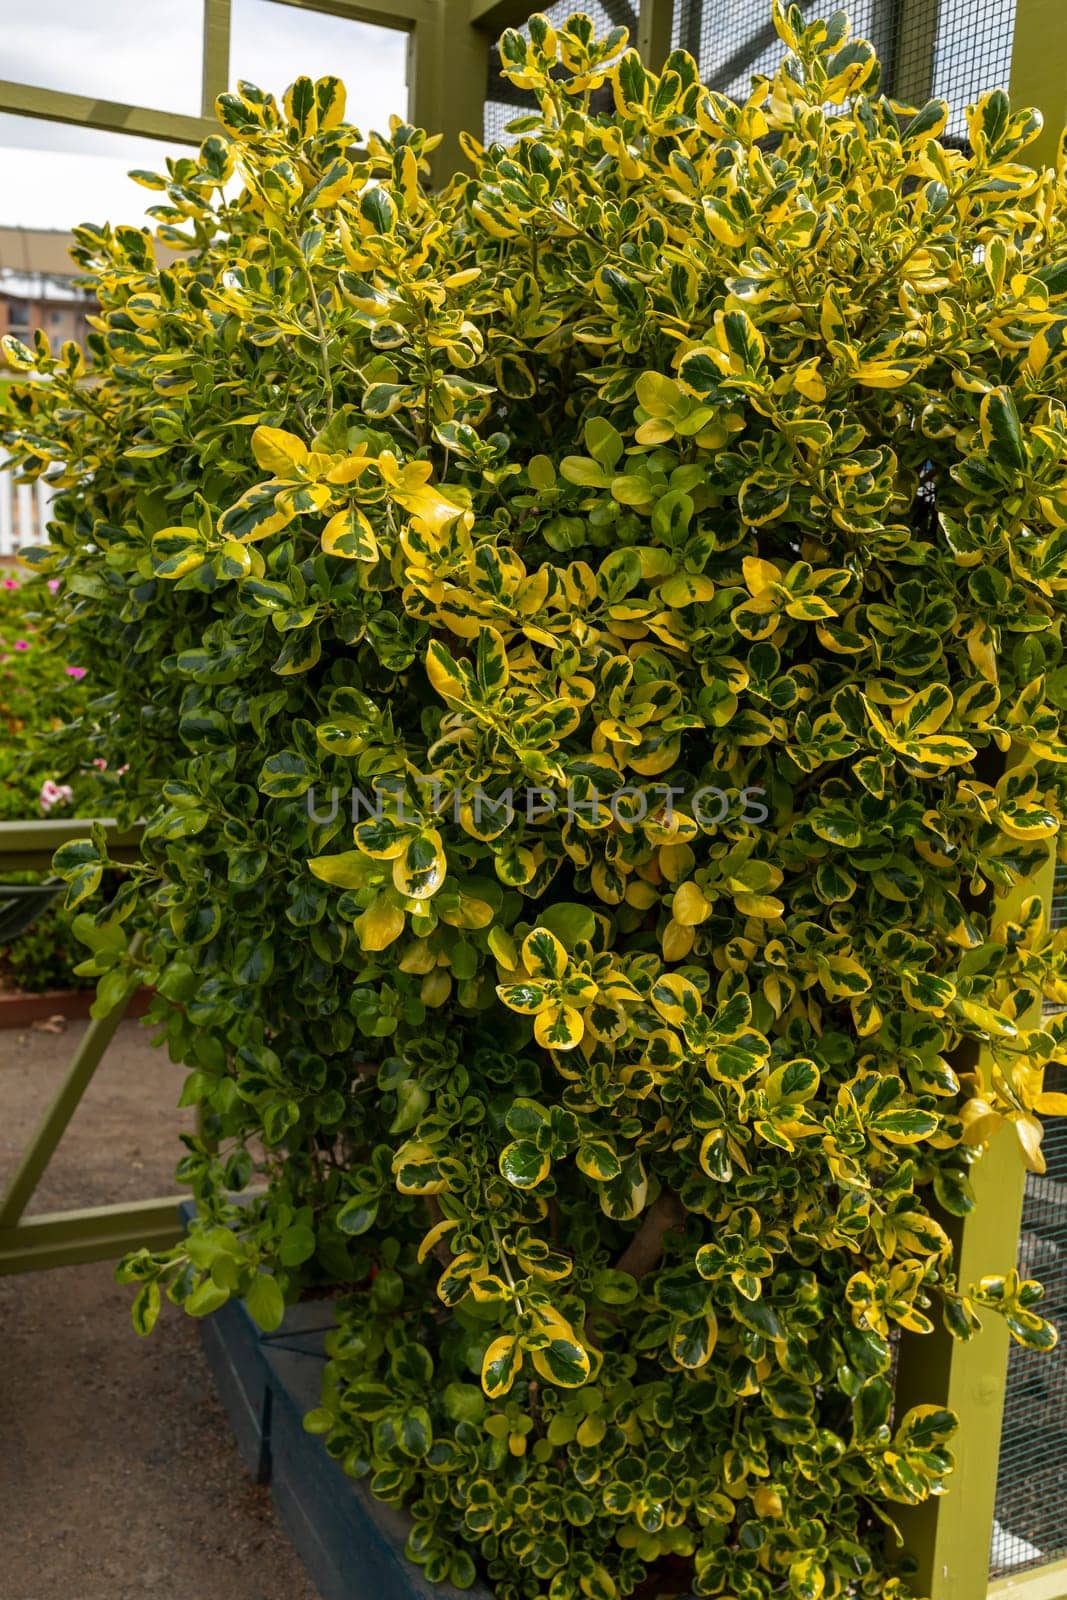 Closeup Evergreen Shrub Golden Euonymus With Green, Gold Variegated Foliage in Outdoors on Backyard. Evonymo Plant, Small Spindle Tree. Vertical Plane. Floriculture, Greenhouse.